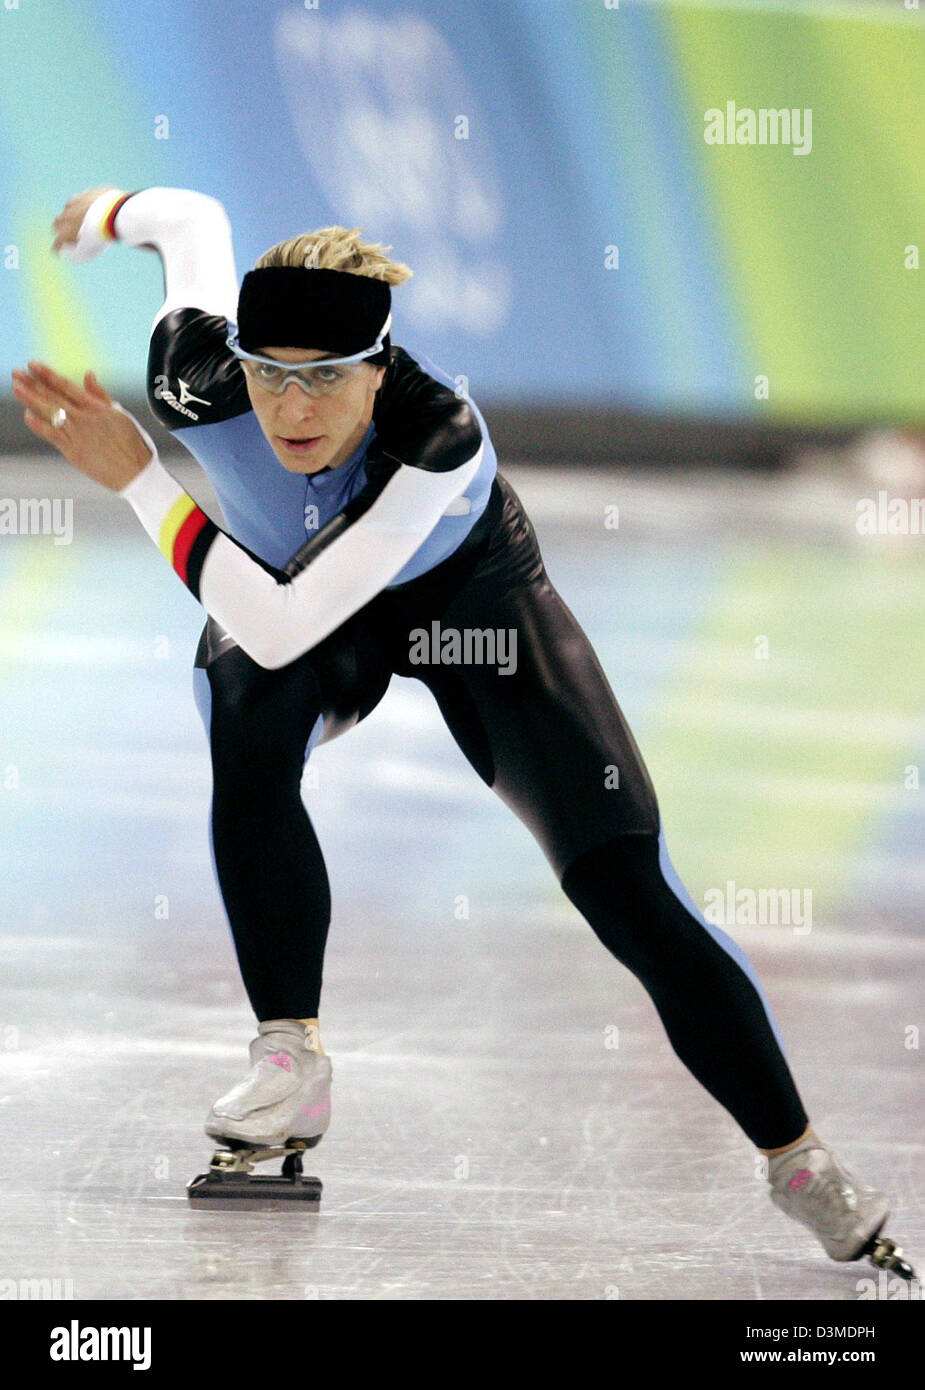 German Speed skater Anni Friesinger is pictured during a speed skating training run in Turin, Italy, Sunday 12 February 2006. The XX Olympic Winter Games take place in Italy from 10 February to 26 February 2006. Photo: Frank May Stock Photo